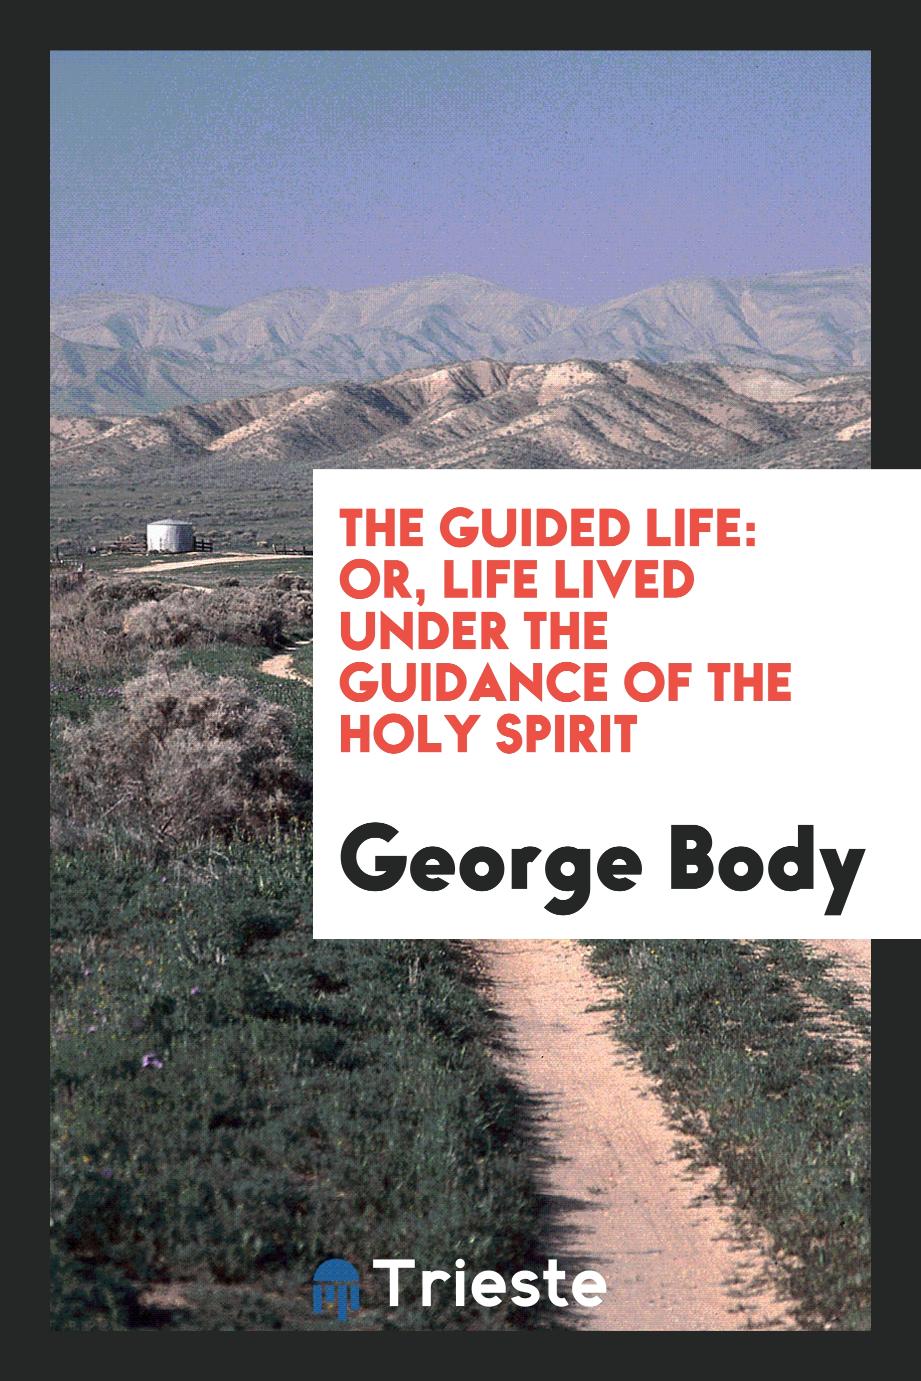 The Guided Life: Or, Life Lived Under the Guidance of the Holy Spirit